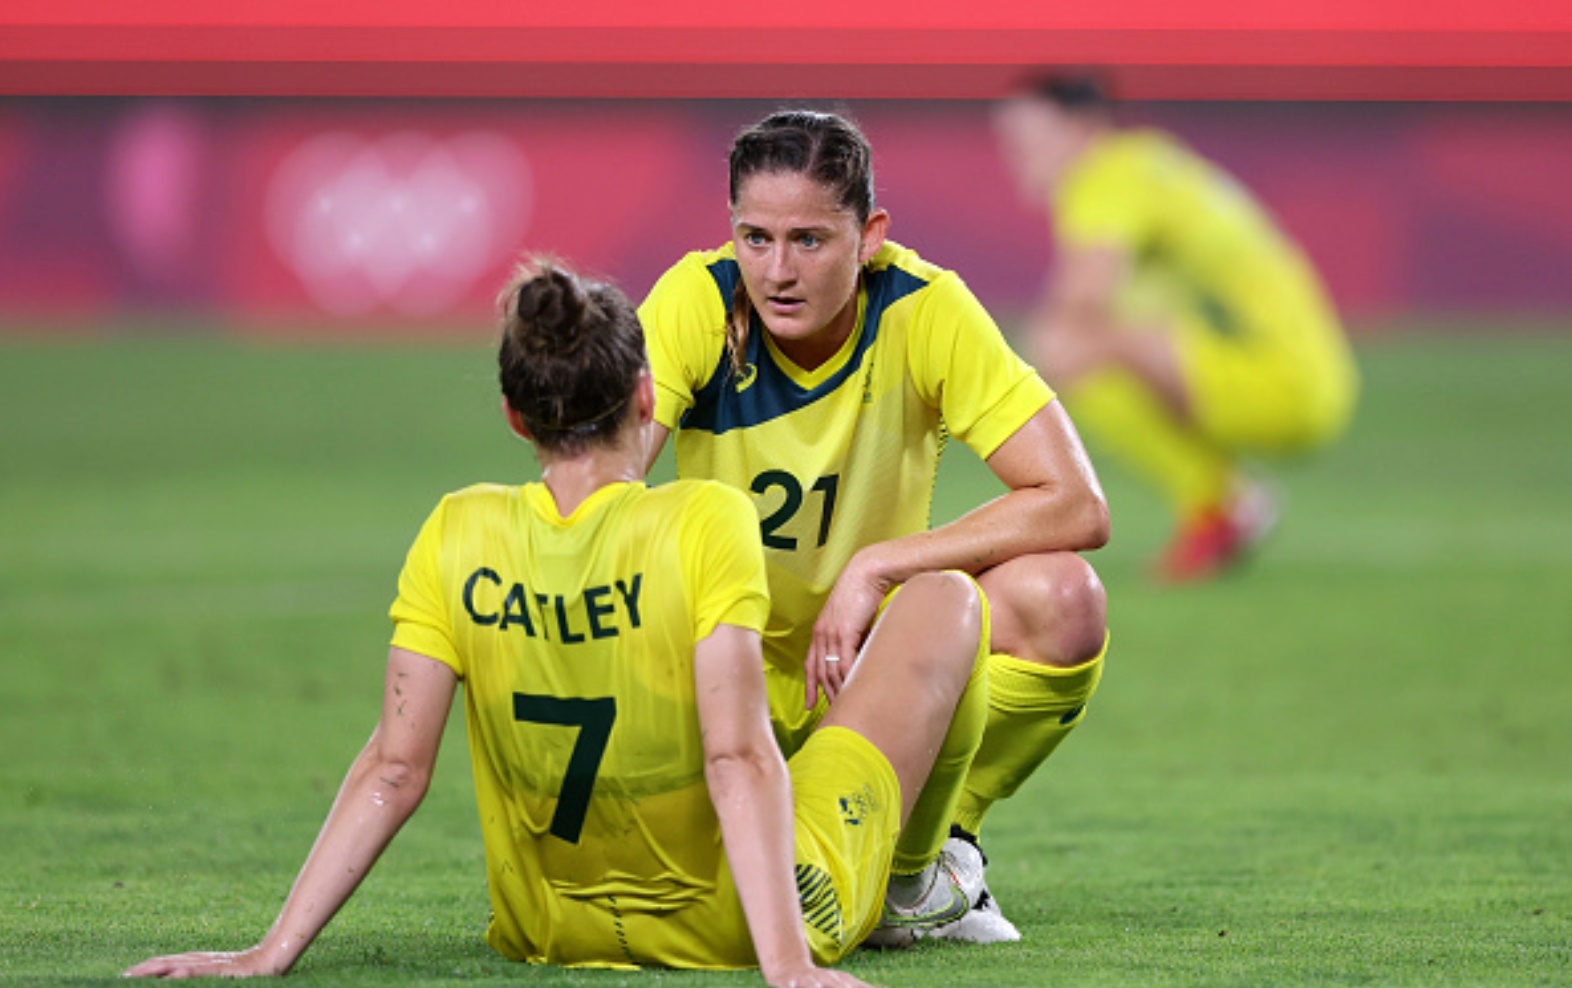 KASHIMA, JAPAN - AUGUST 05: Steph Catley #7 of Team Australia is consoled by Laura Brock #21 following defeat in the Women's Bronze Medal match between United States and Australia on day thirteen of the Tokyo 2020 Olympic Games at Kashima Stadium on August 05, 2021 in Kashima, Japan. (Photo by Elsa/Getty Images)